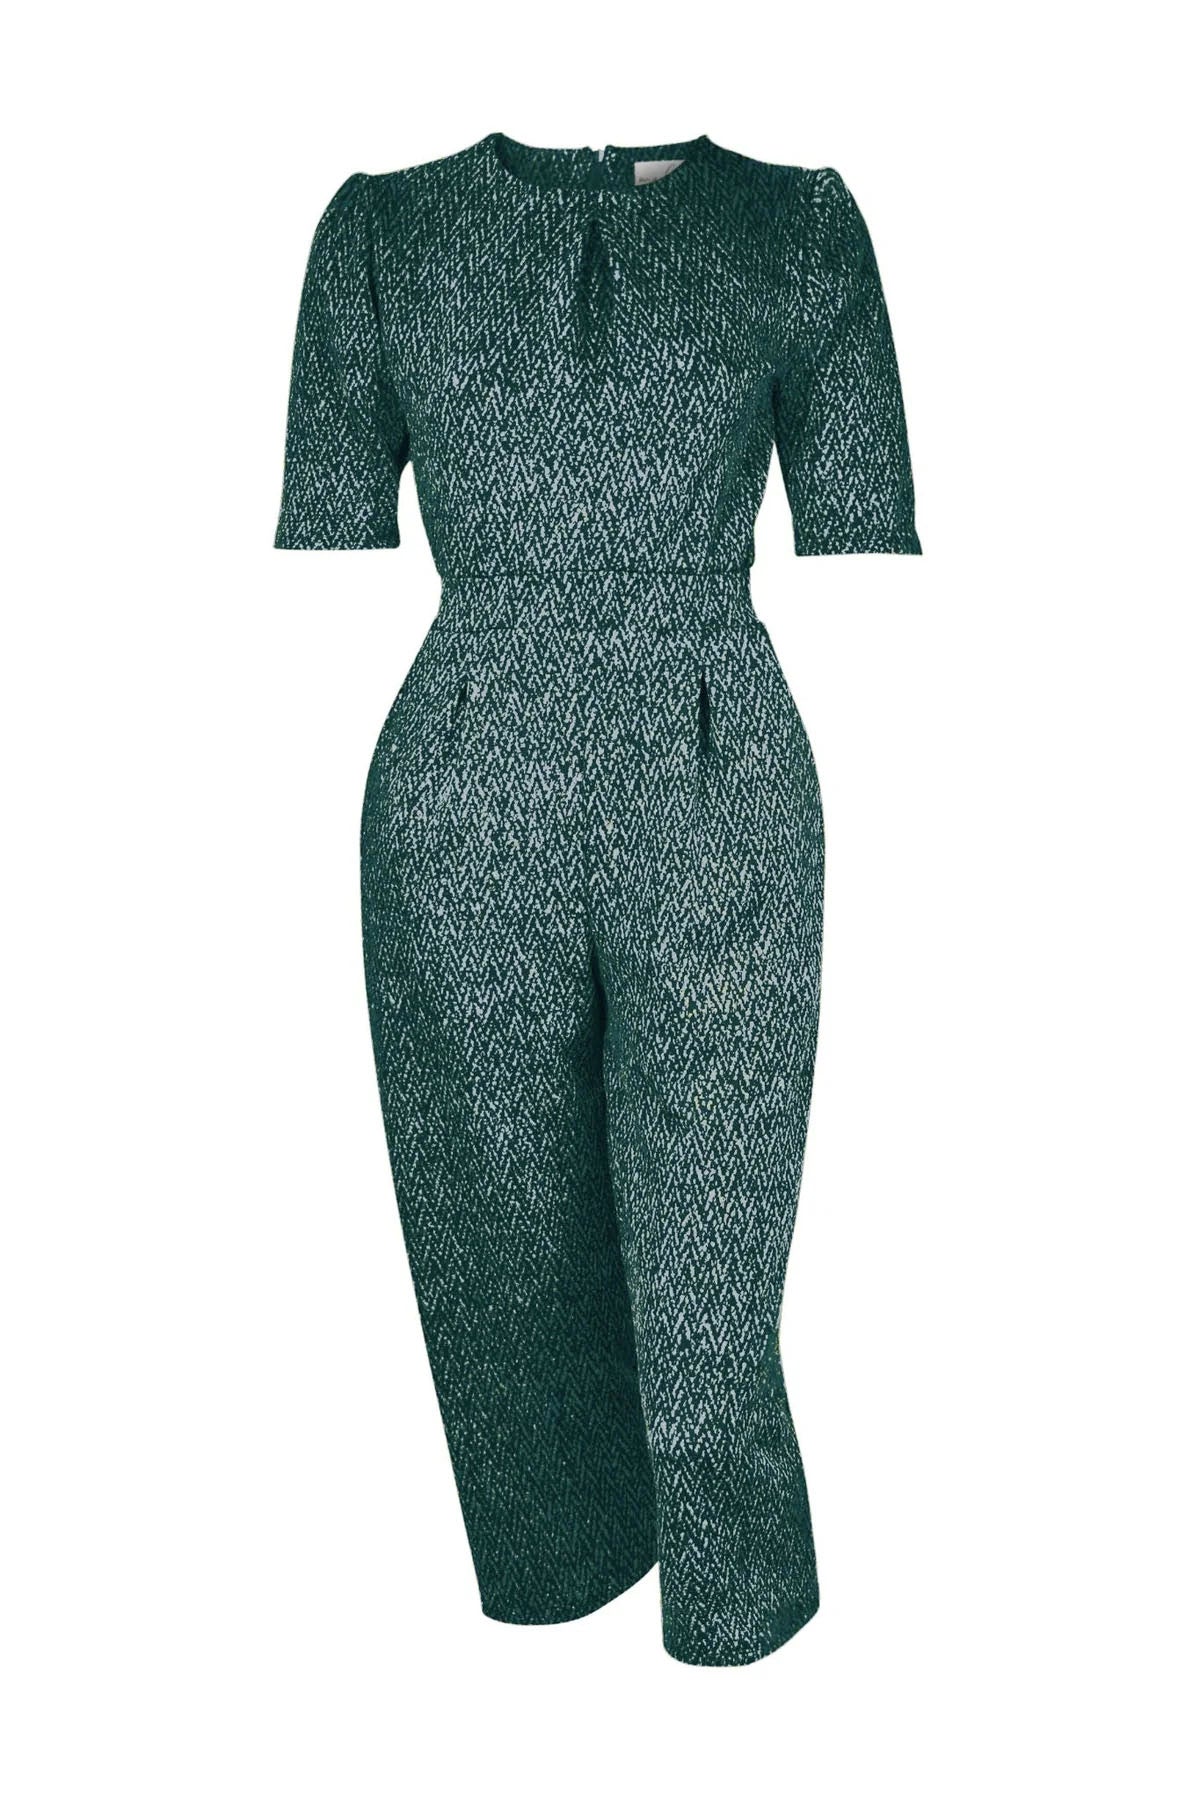 Herman Jumpsuit by Melow, Teal, slightly puffed shoulders, elbow length sleeves, defined elastic waist, 7/8 length wide legs, zipper at back, side pockets, sizes XS to XXL, made in Montreal 